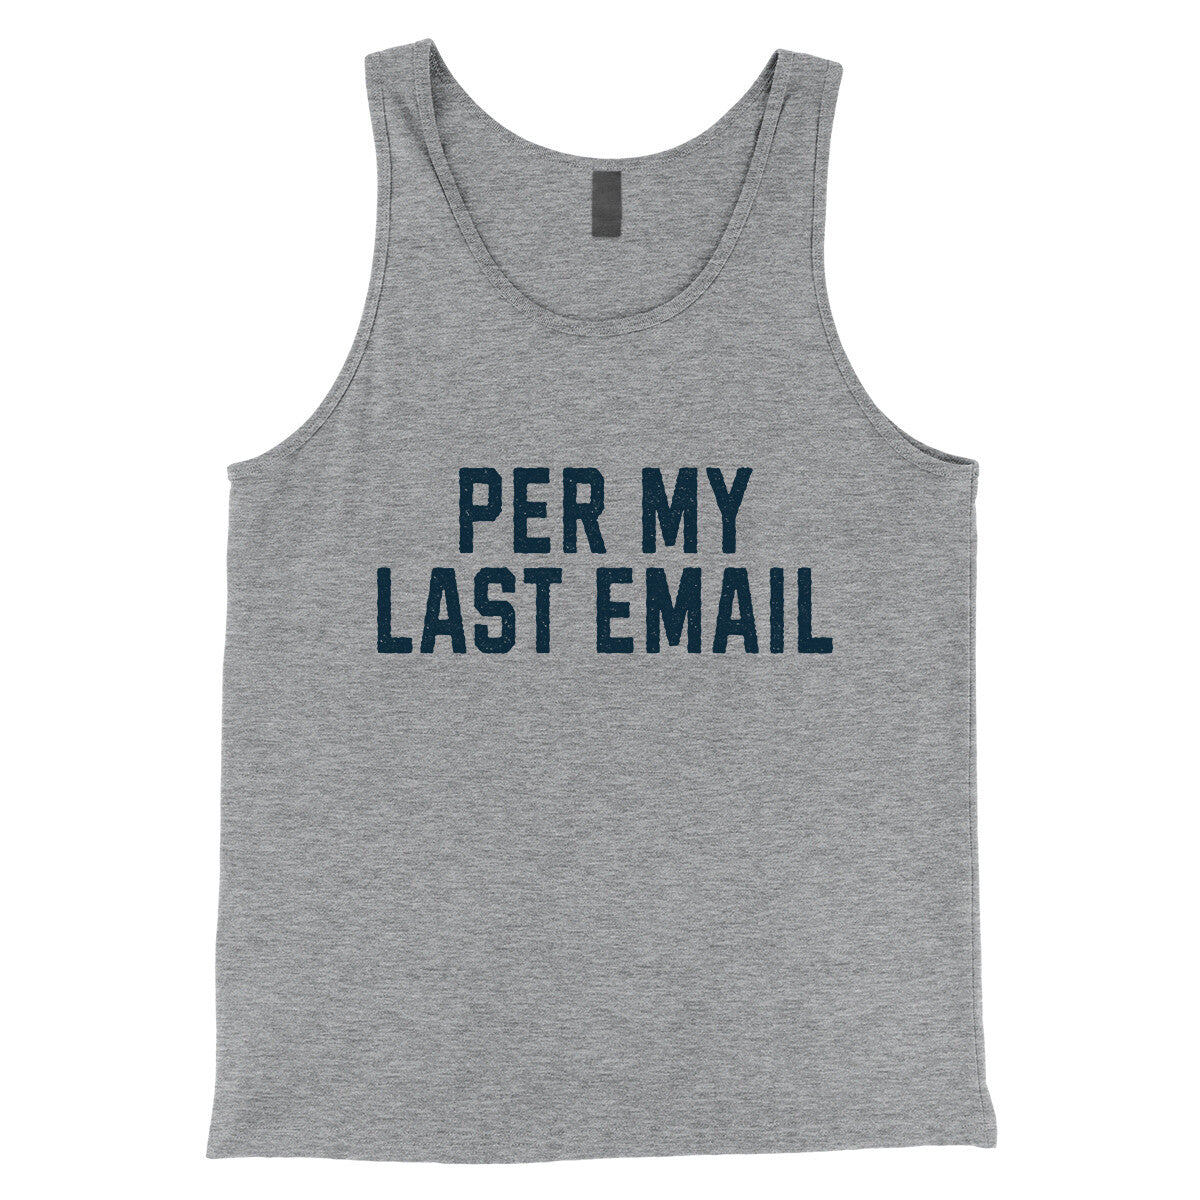 Per My Last Email in Athletic Heather Color